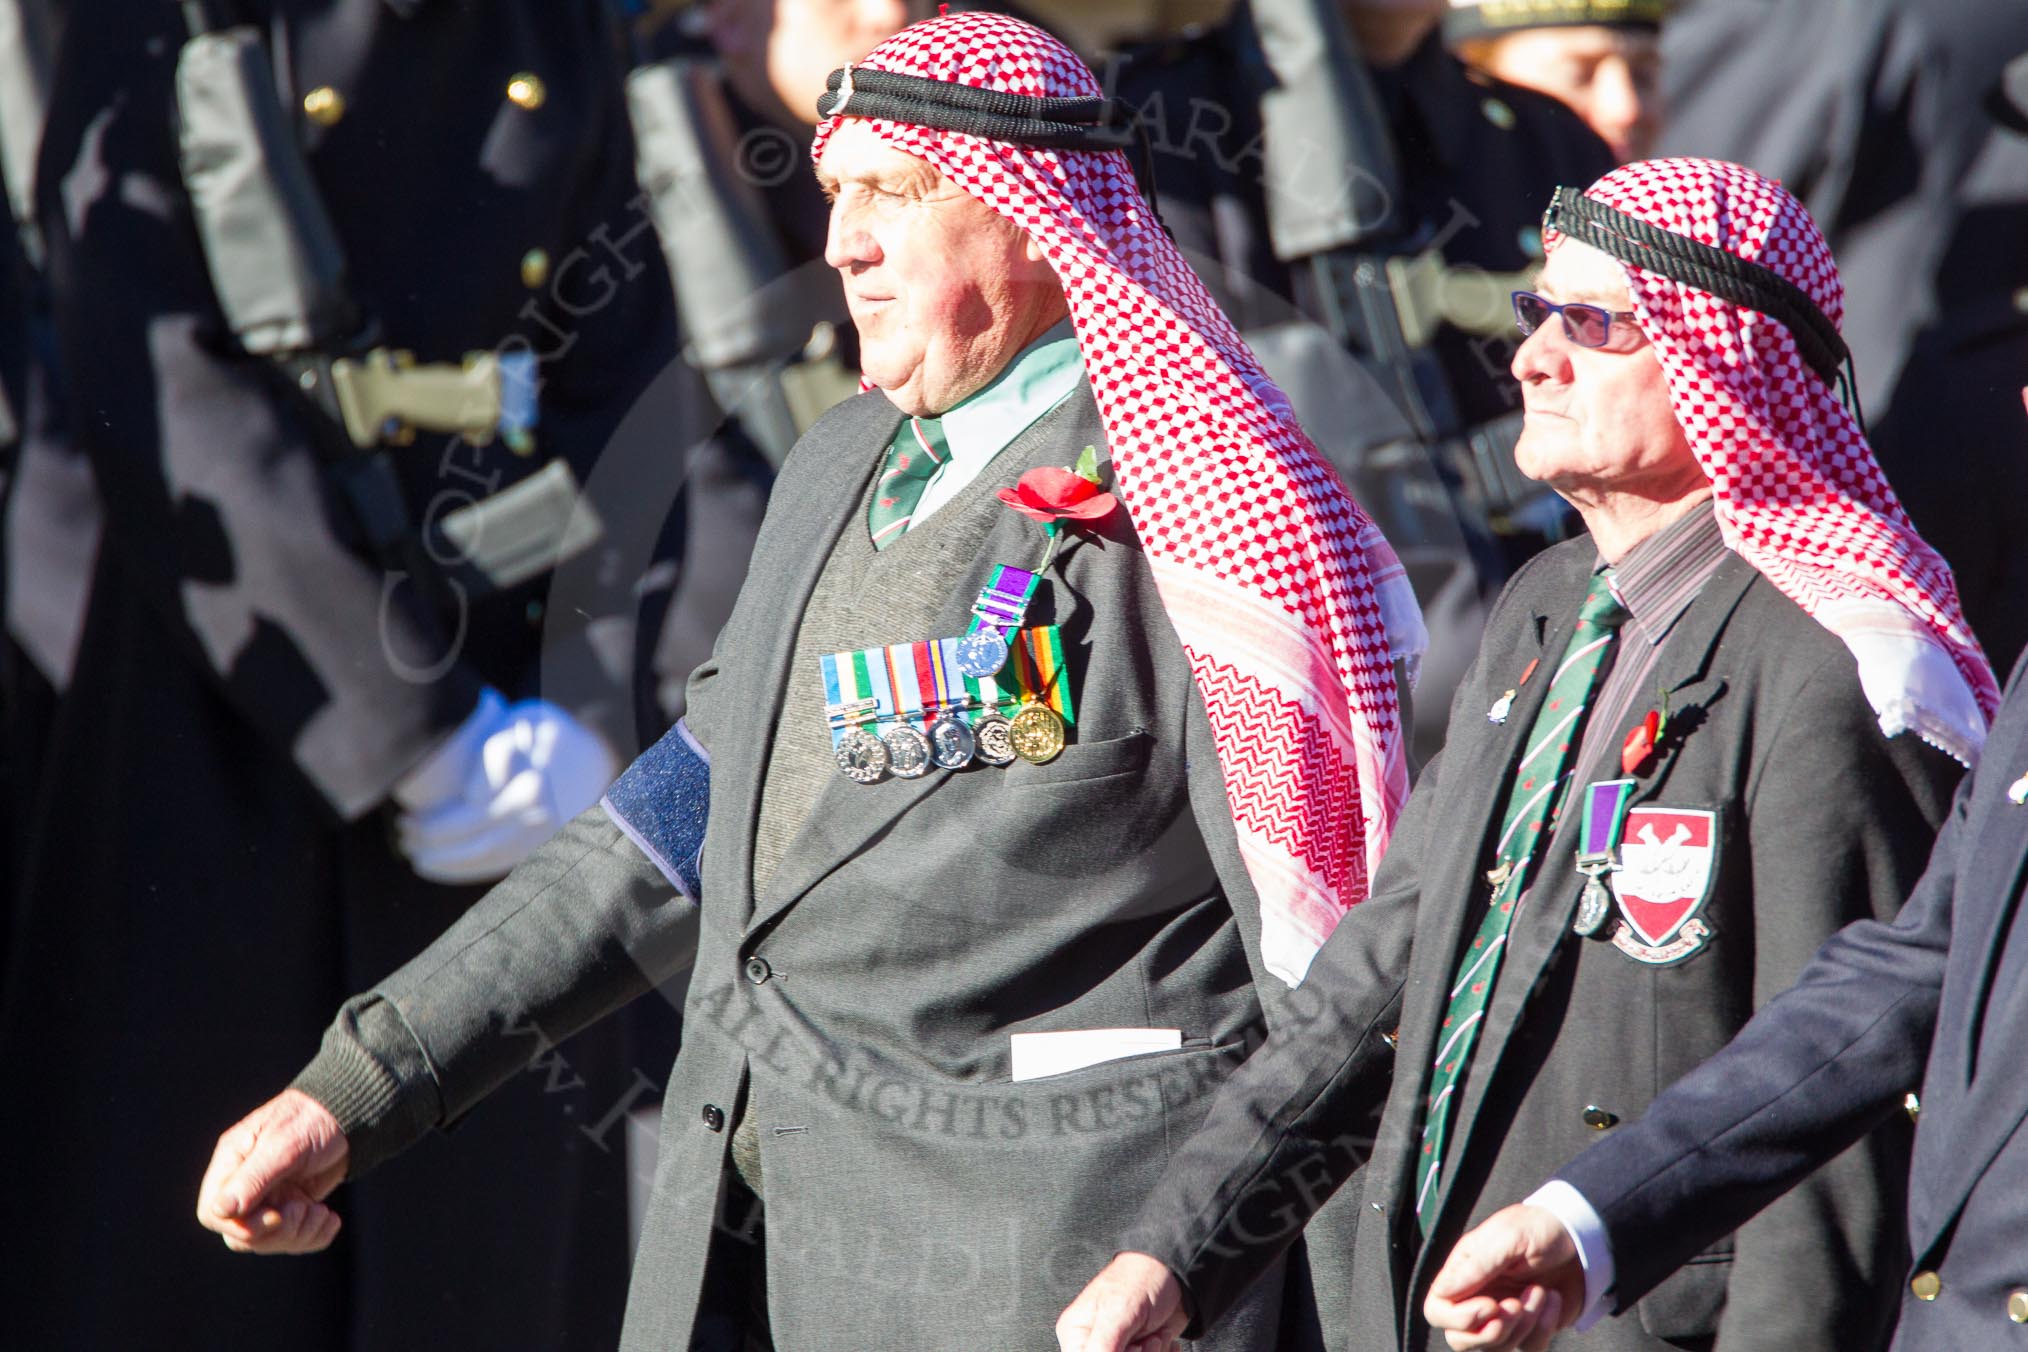 Remembrance Sunday Cenotaph March Past 2013: D4 - Trucial Oman Scouts Association..
Press stand opposite the Foreign Office building, Whitehall, London SW1,
London,
Greater London,
United Kingdom,
on 10 November 2013 at 11:39, image #51